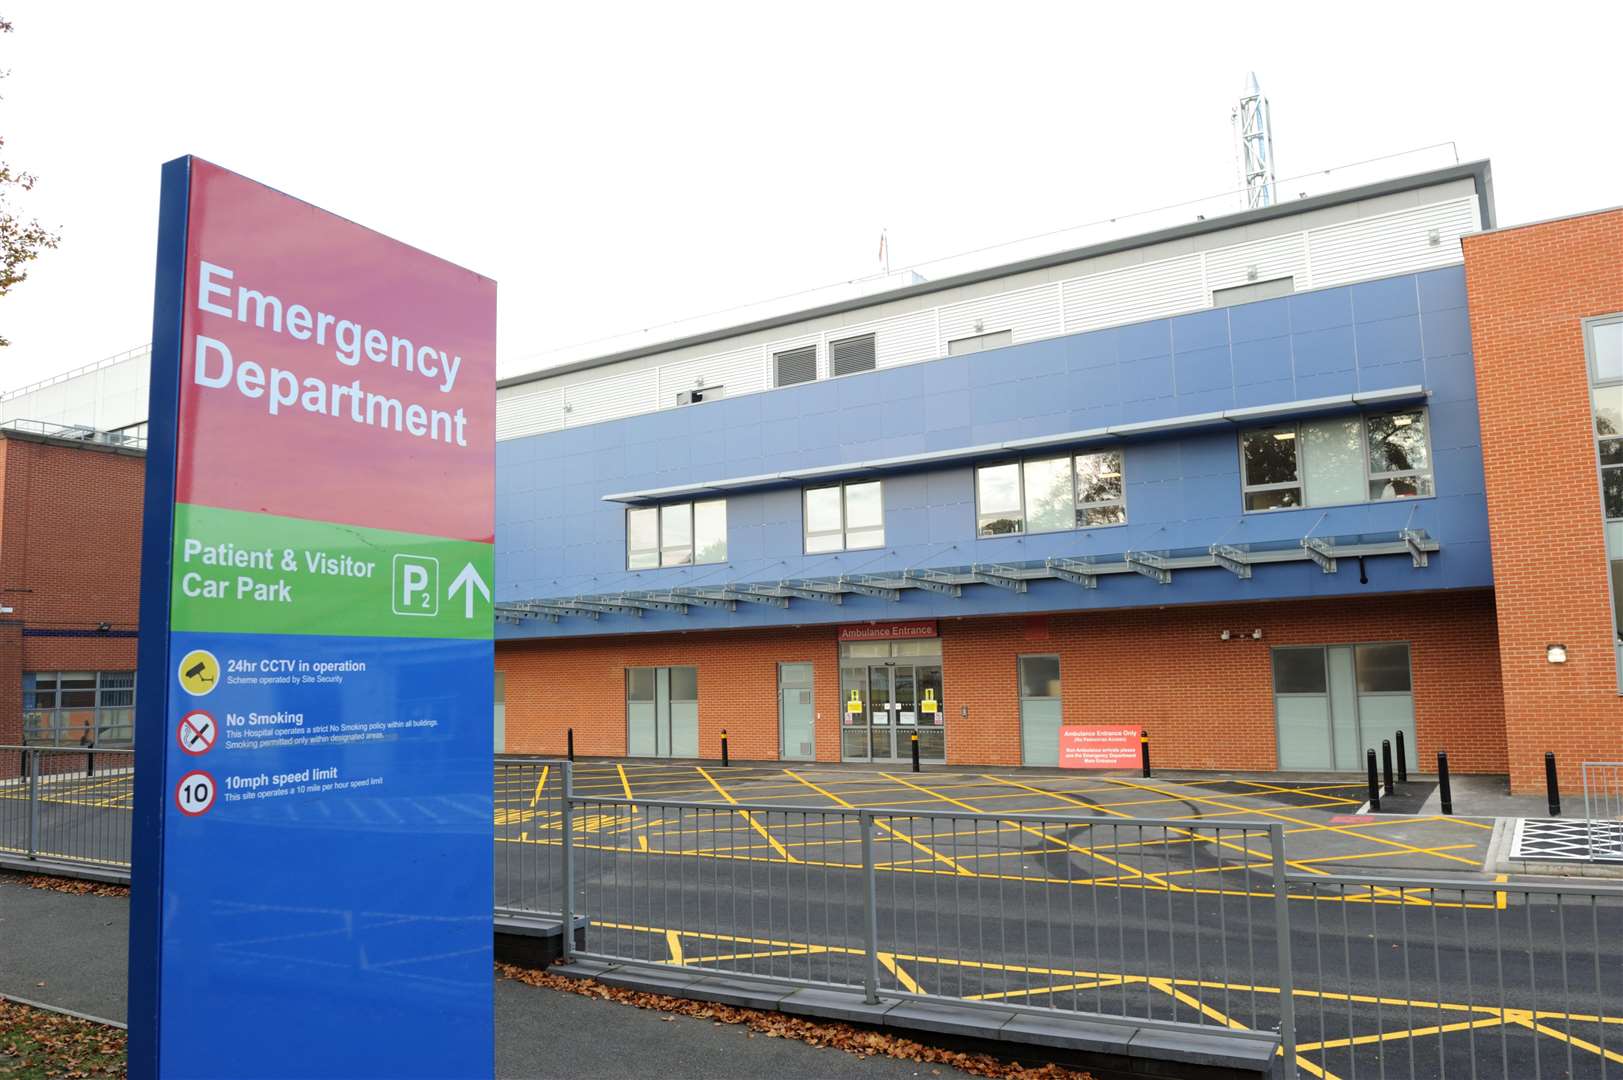 Medway Maritime Hospital was earlier described as a "war zone" by some patients